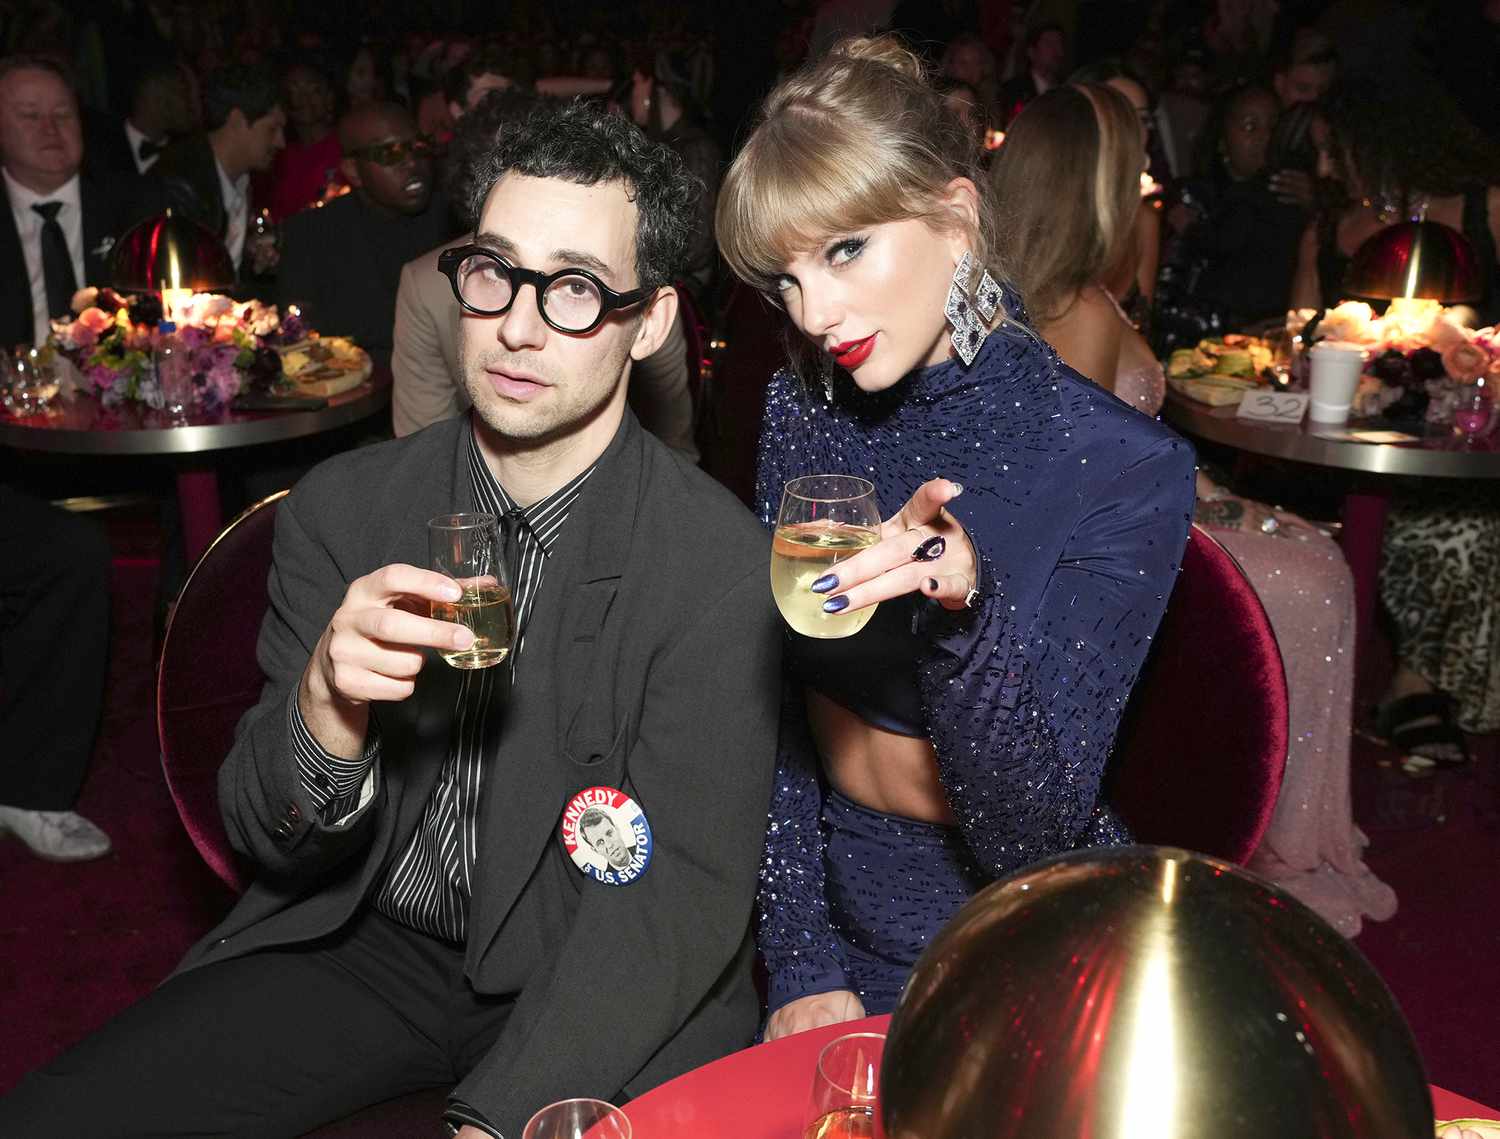 Jack antonoff wearing a black suit and Taylor Swift wearing blue out fit while holding glass